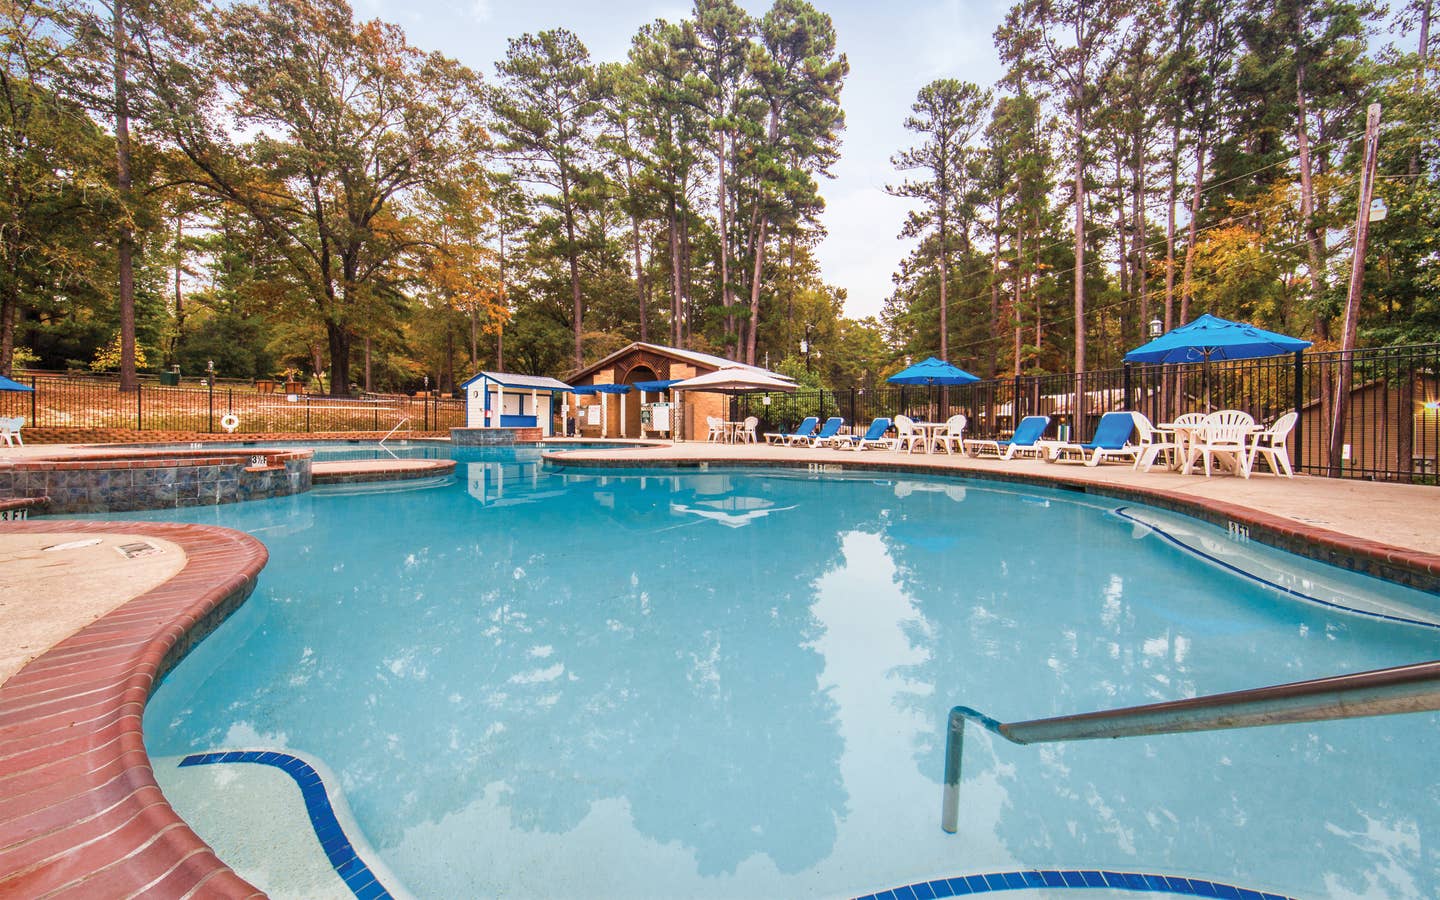 Outdoor pool with sun umbrellas at Holly Lake Resort in Texas.